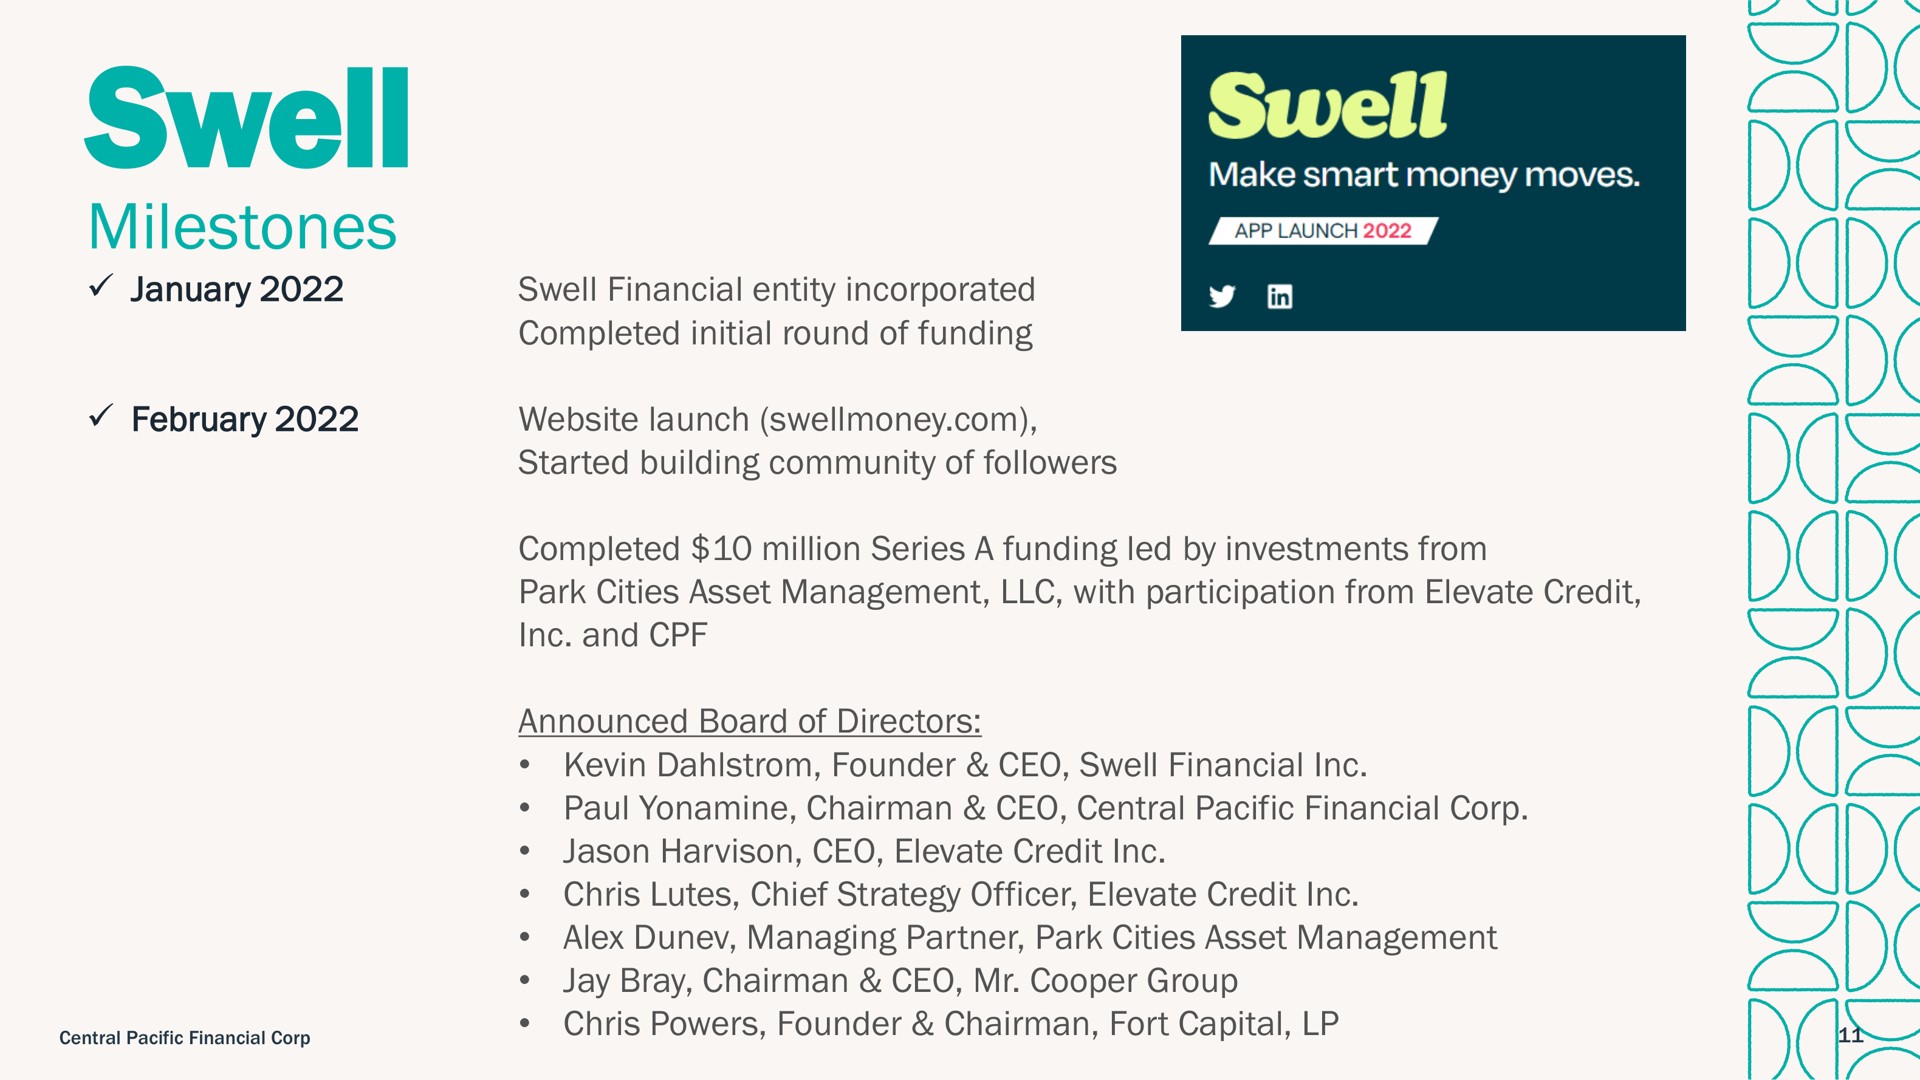 swell milestones | Central Pacific Financial